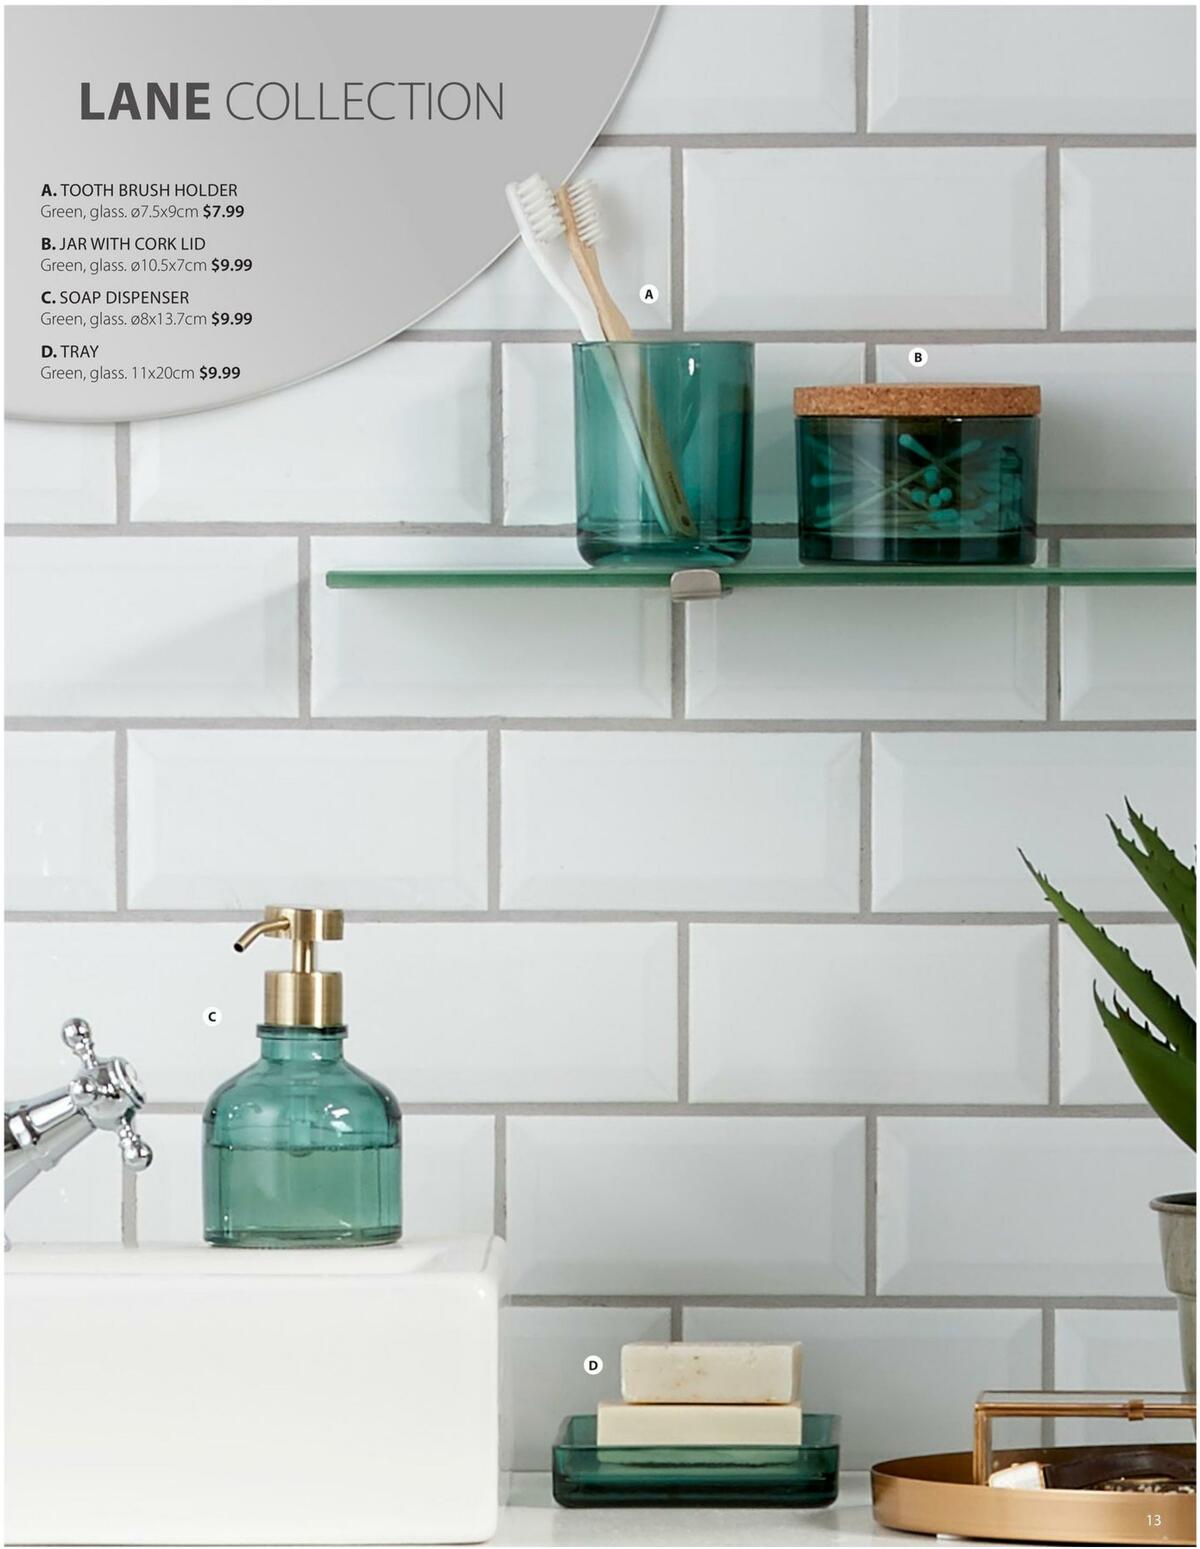 JYSK Bathroom Accessories Flyer from February 26